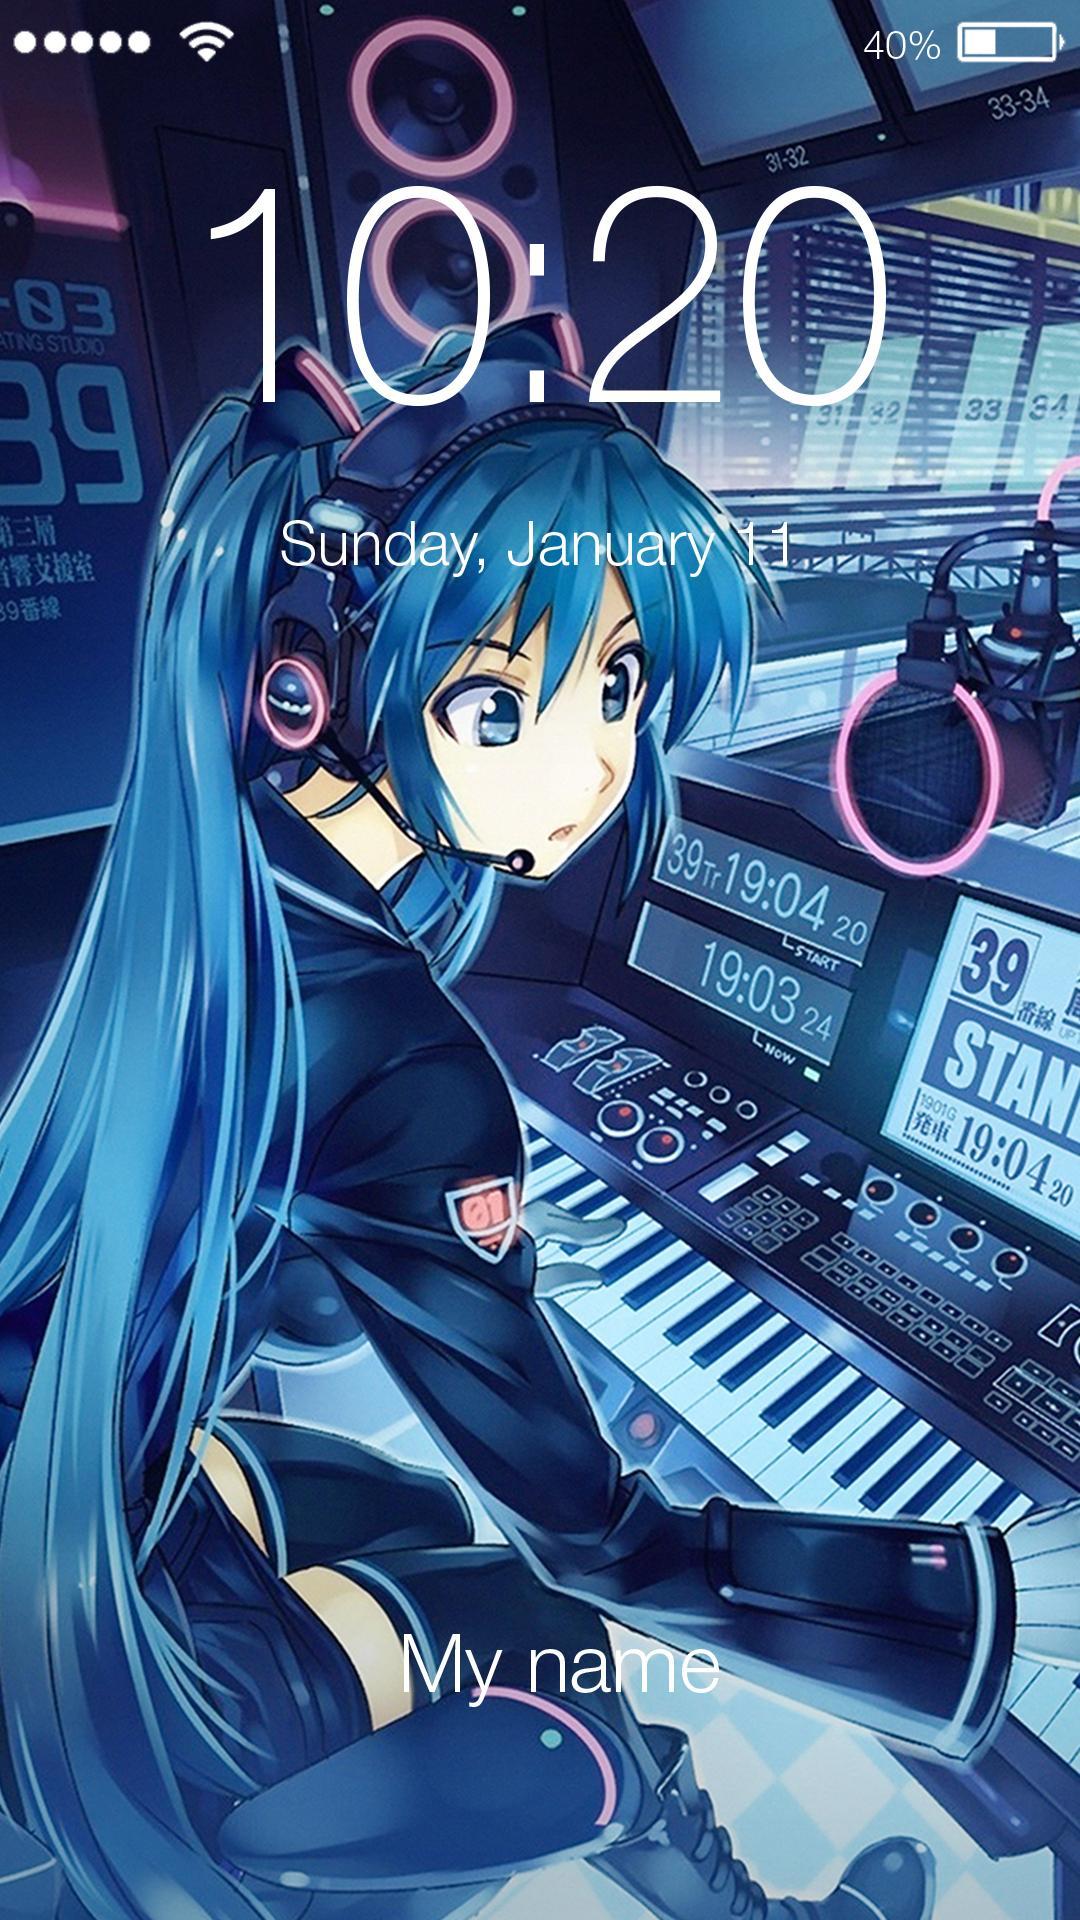 Cool Anime Girls HD Wallpapers Lock Screen for Android - APK Download